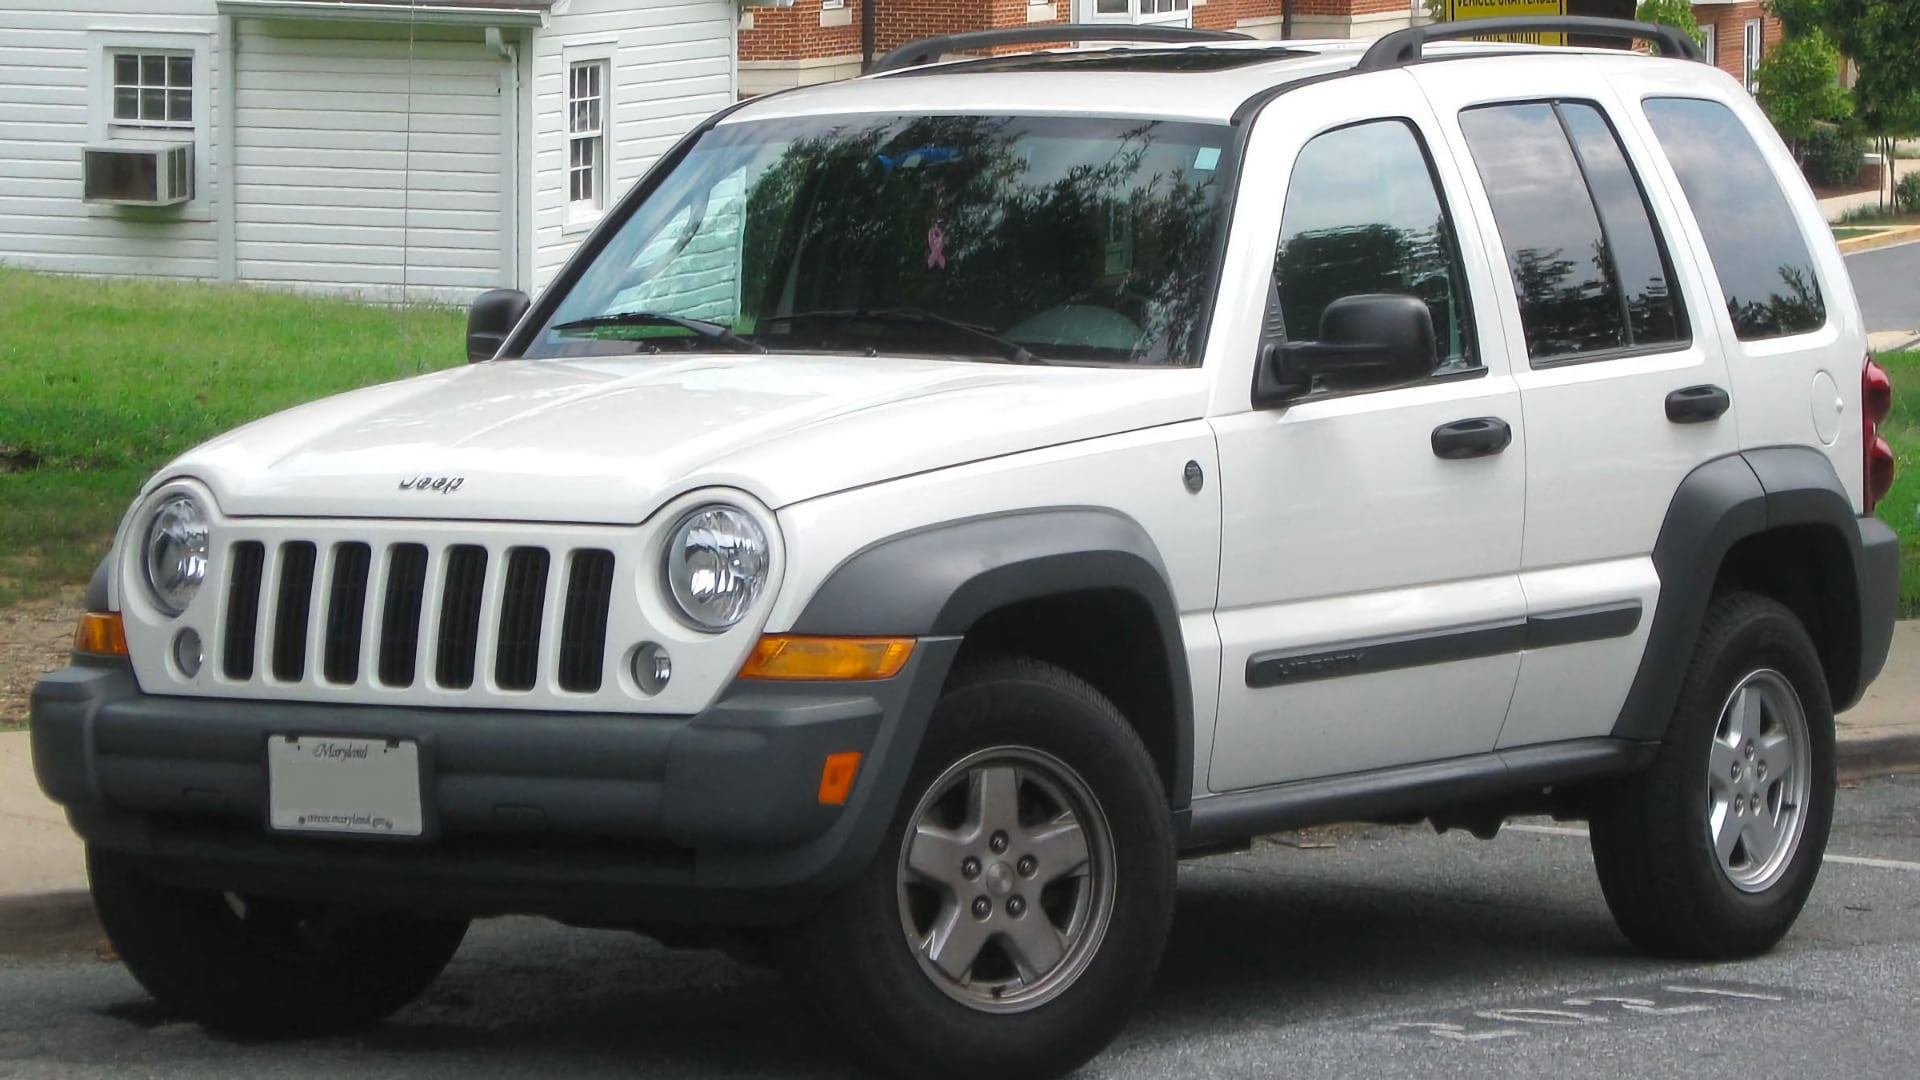 a white jeep parked on the side of the road.